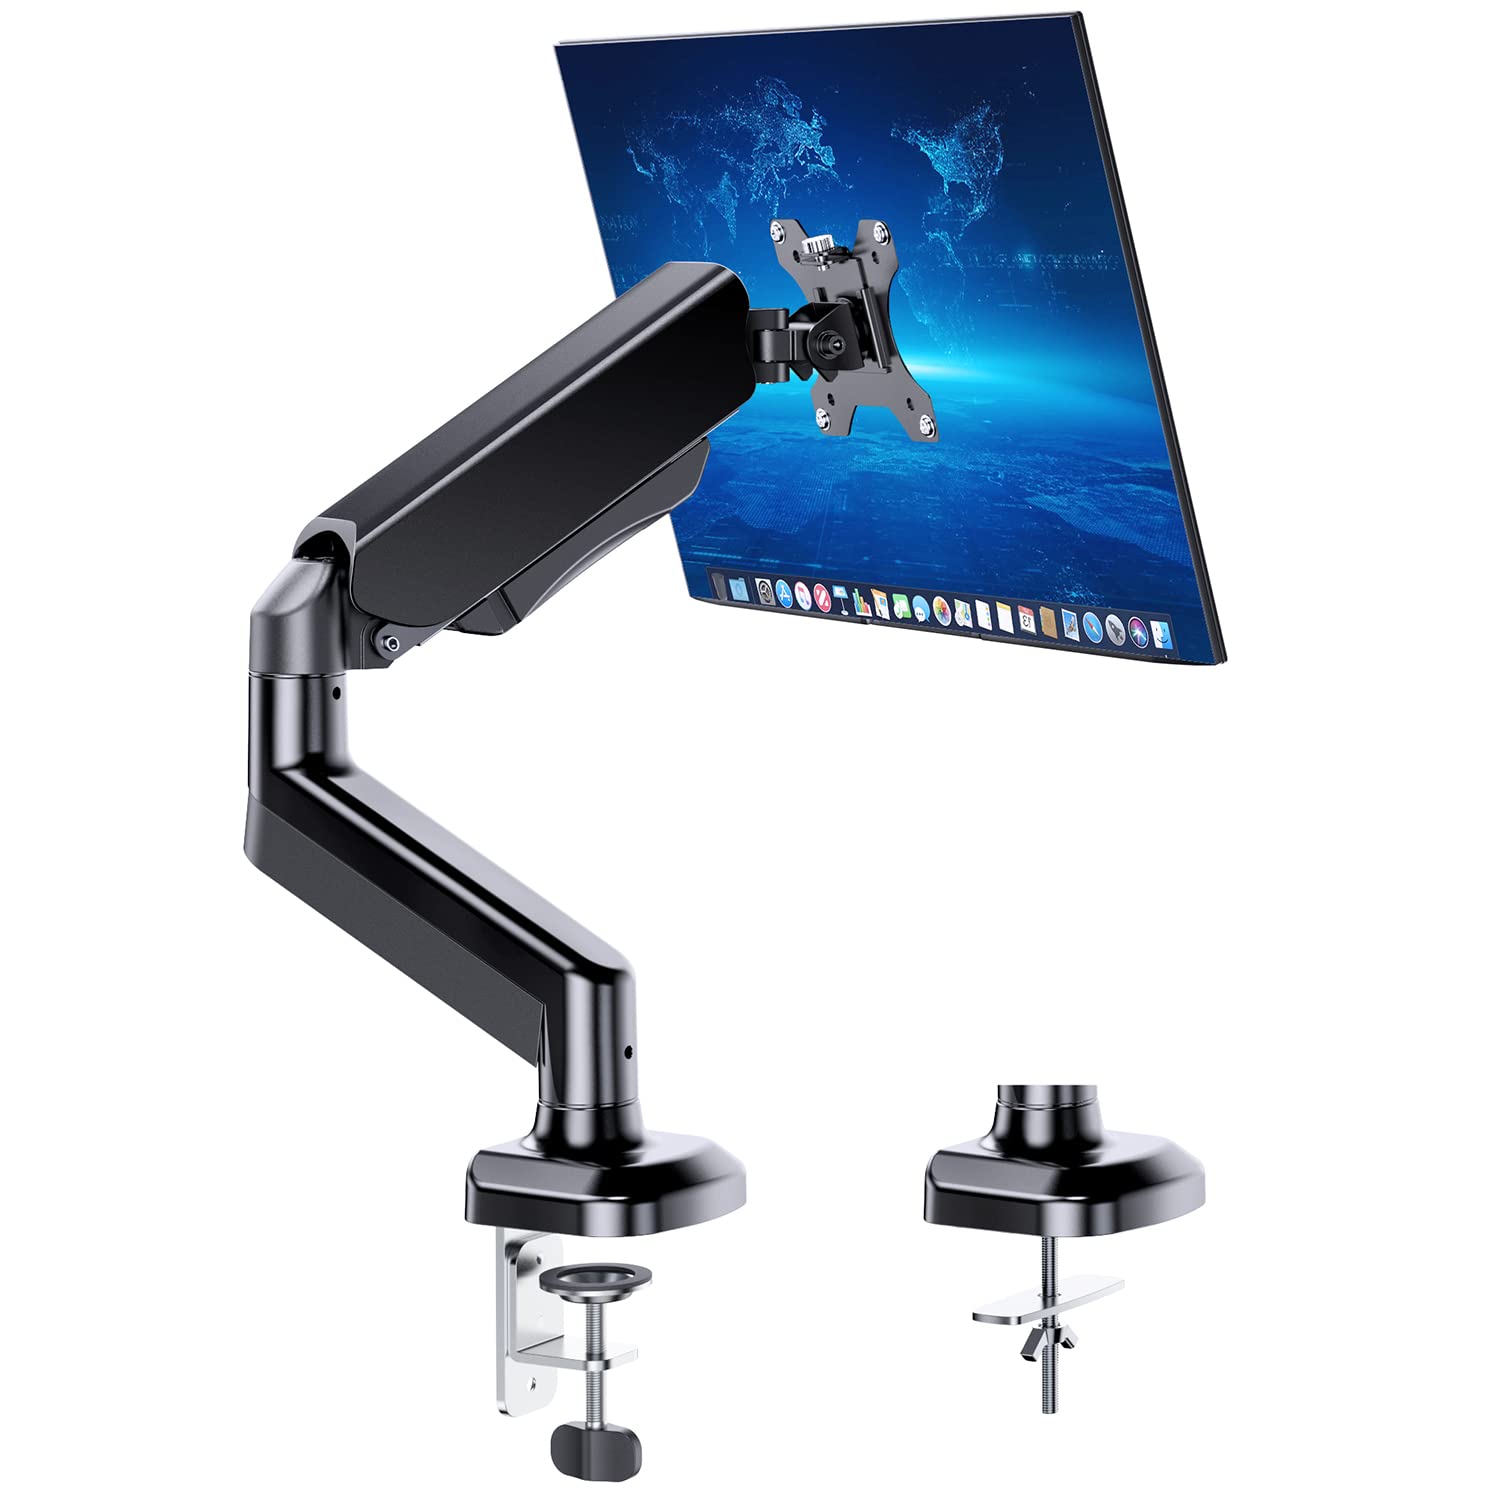 New-Star Adjustable Articulating Gas Spring Monitor Arm with Clamp and Grommet Base for 13 to 27in LCD Monitors upto 14.3lbs